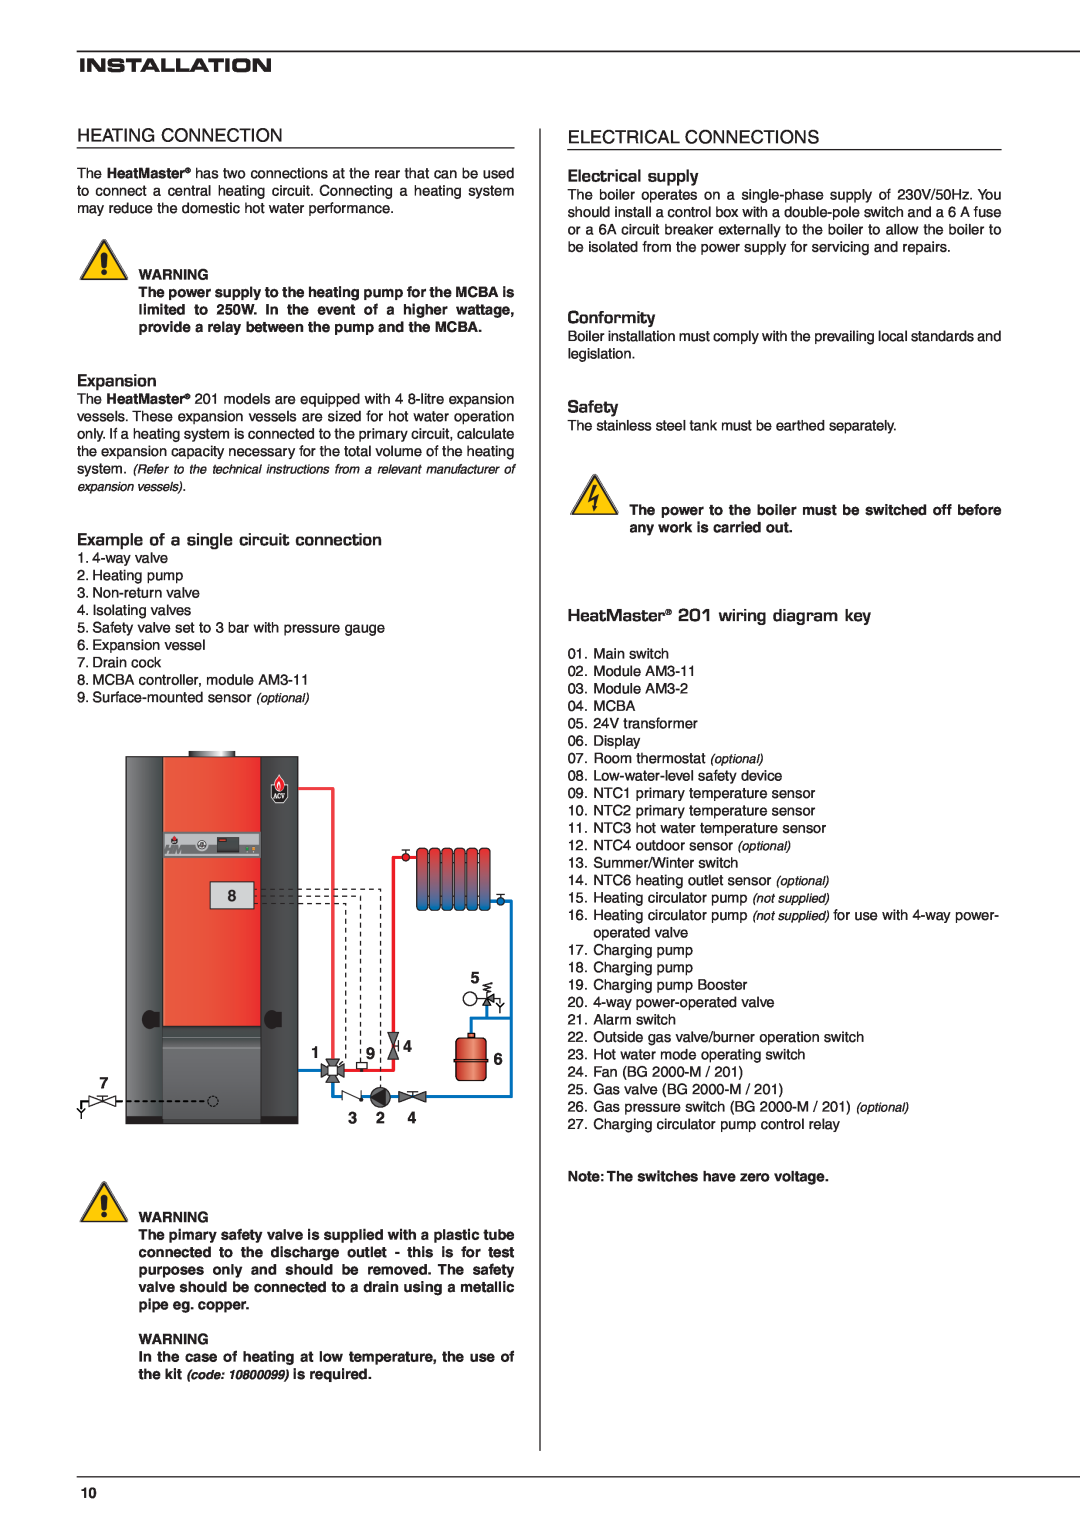 Heatmaster 201 Installation, Expansion, Example of a single circuit connection, Electrical supply, Conformity, Safety 